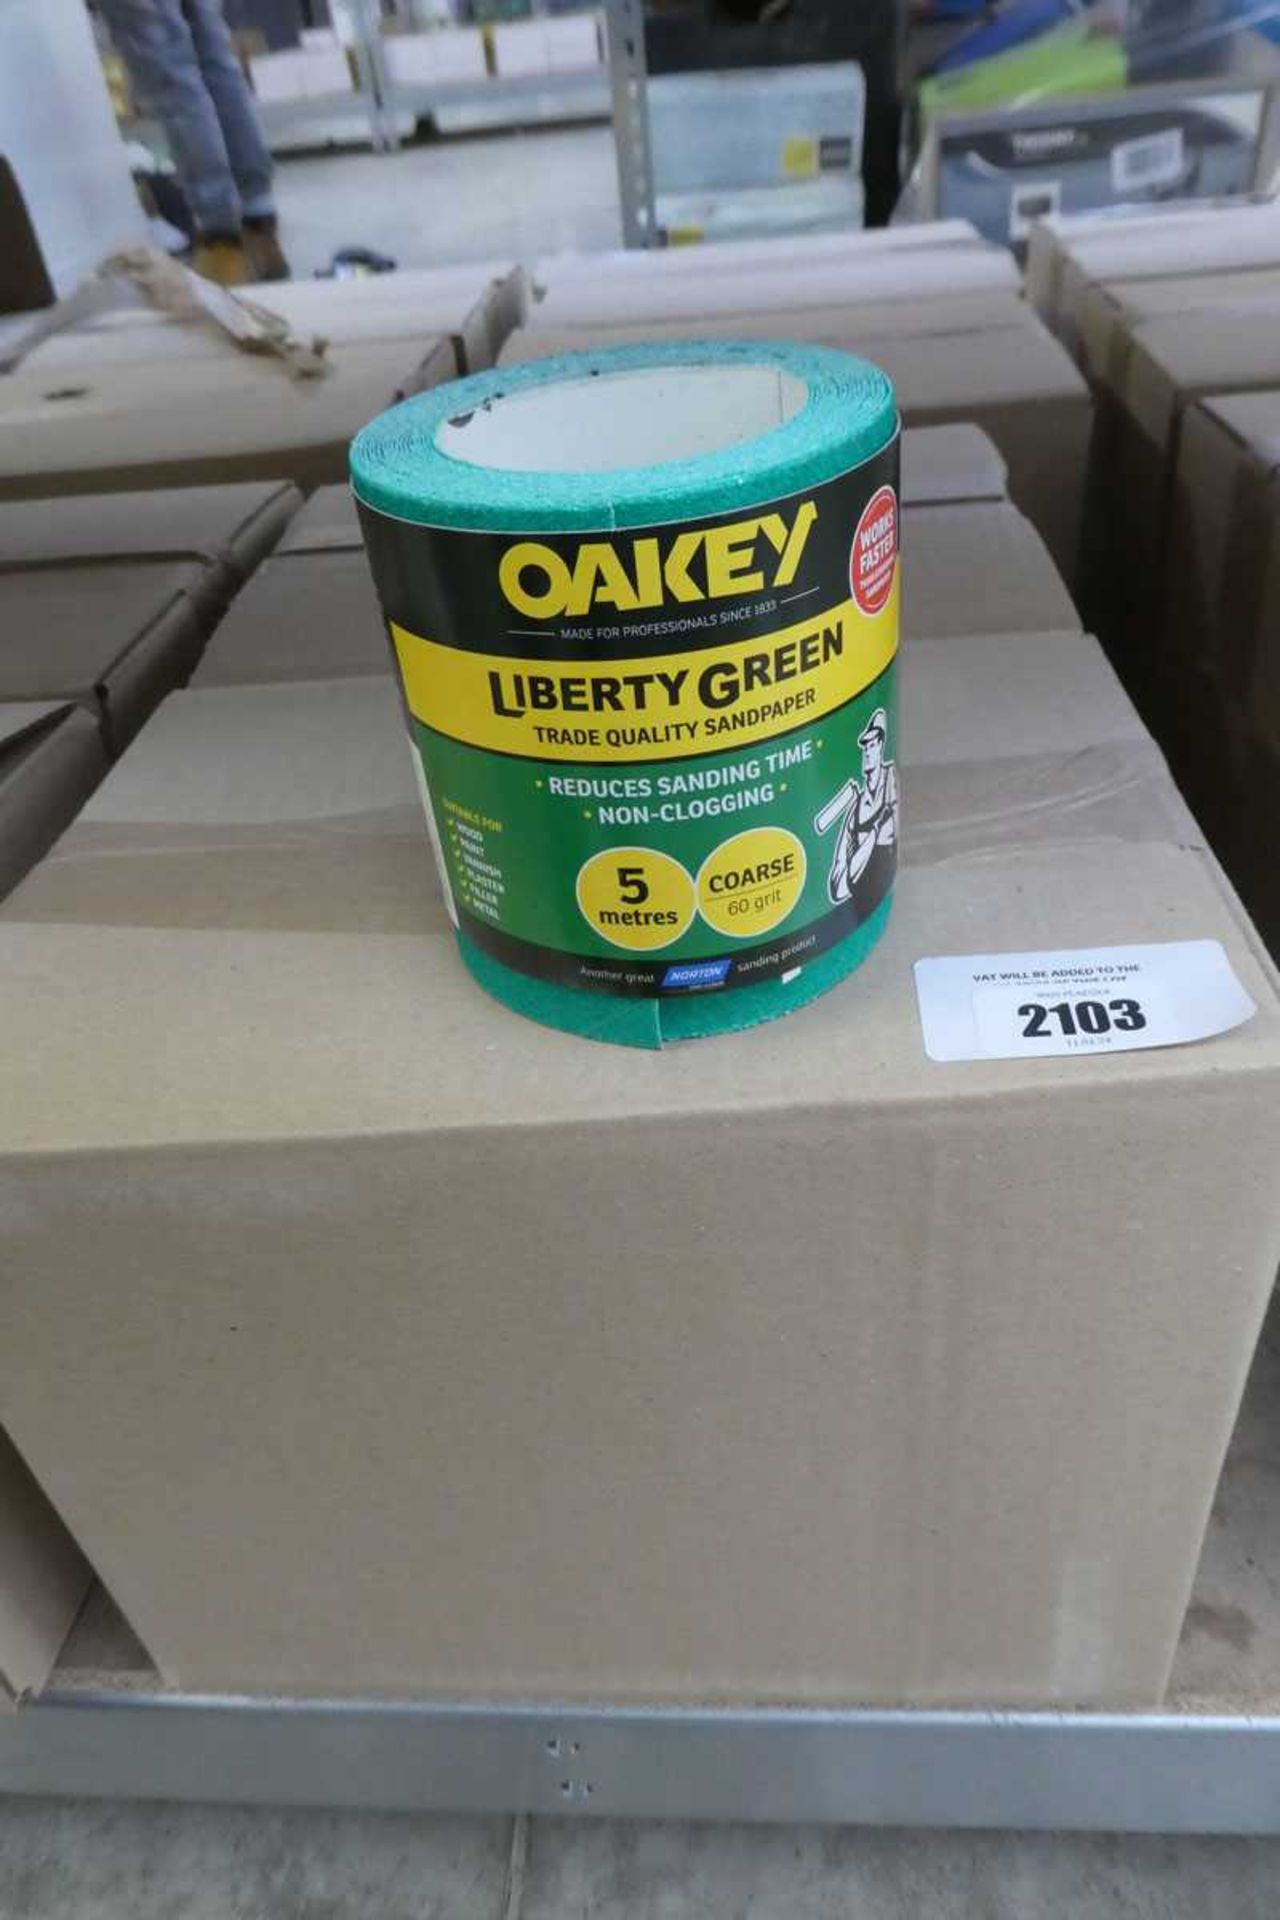 +VAT 2 boxes containing 20 rolls (10 rolls in each box) of Oakey Liberty Green 115 x 5m sand